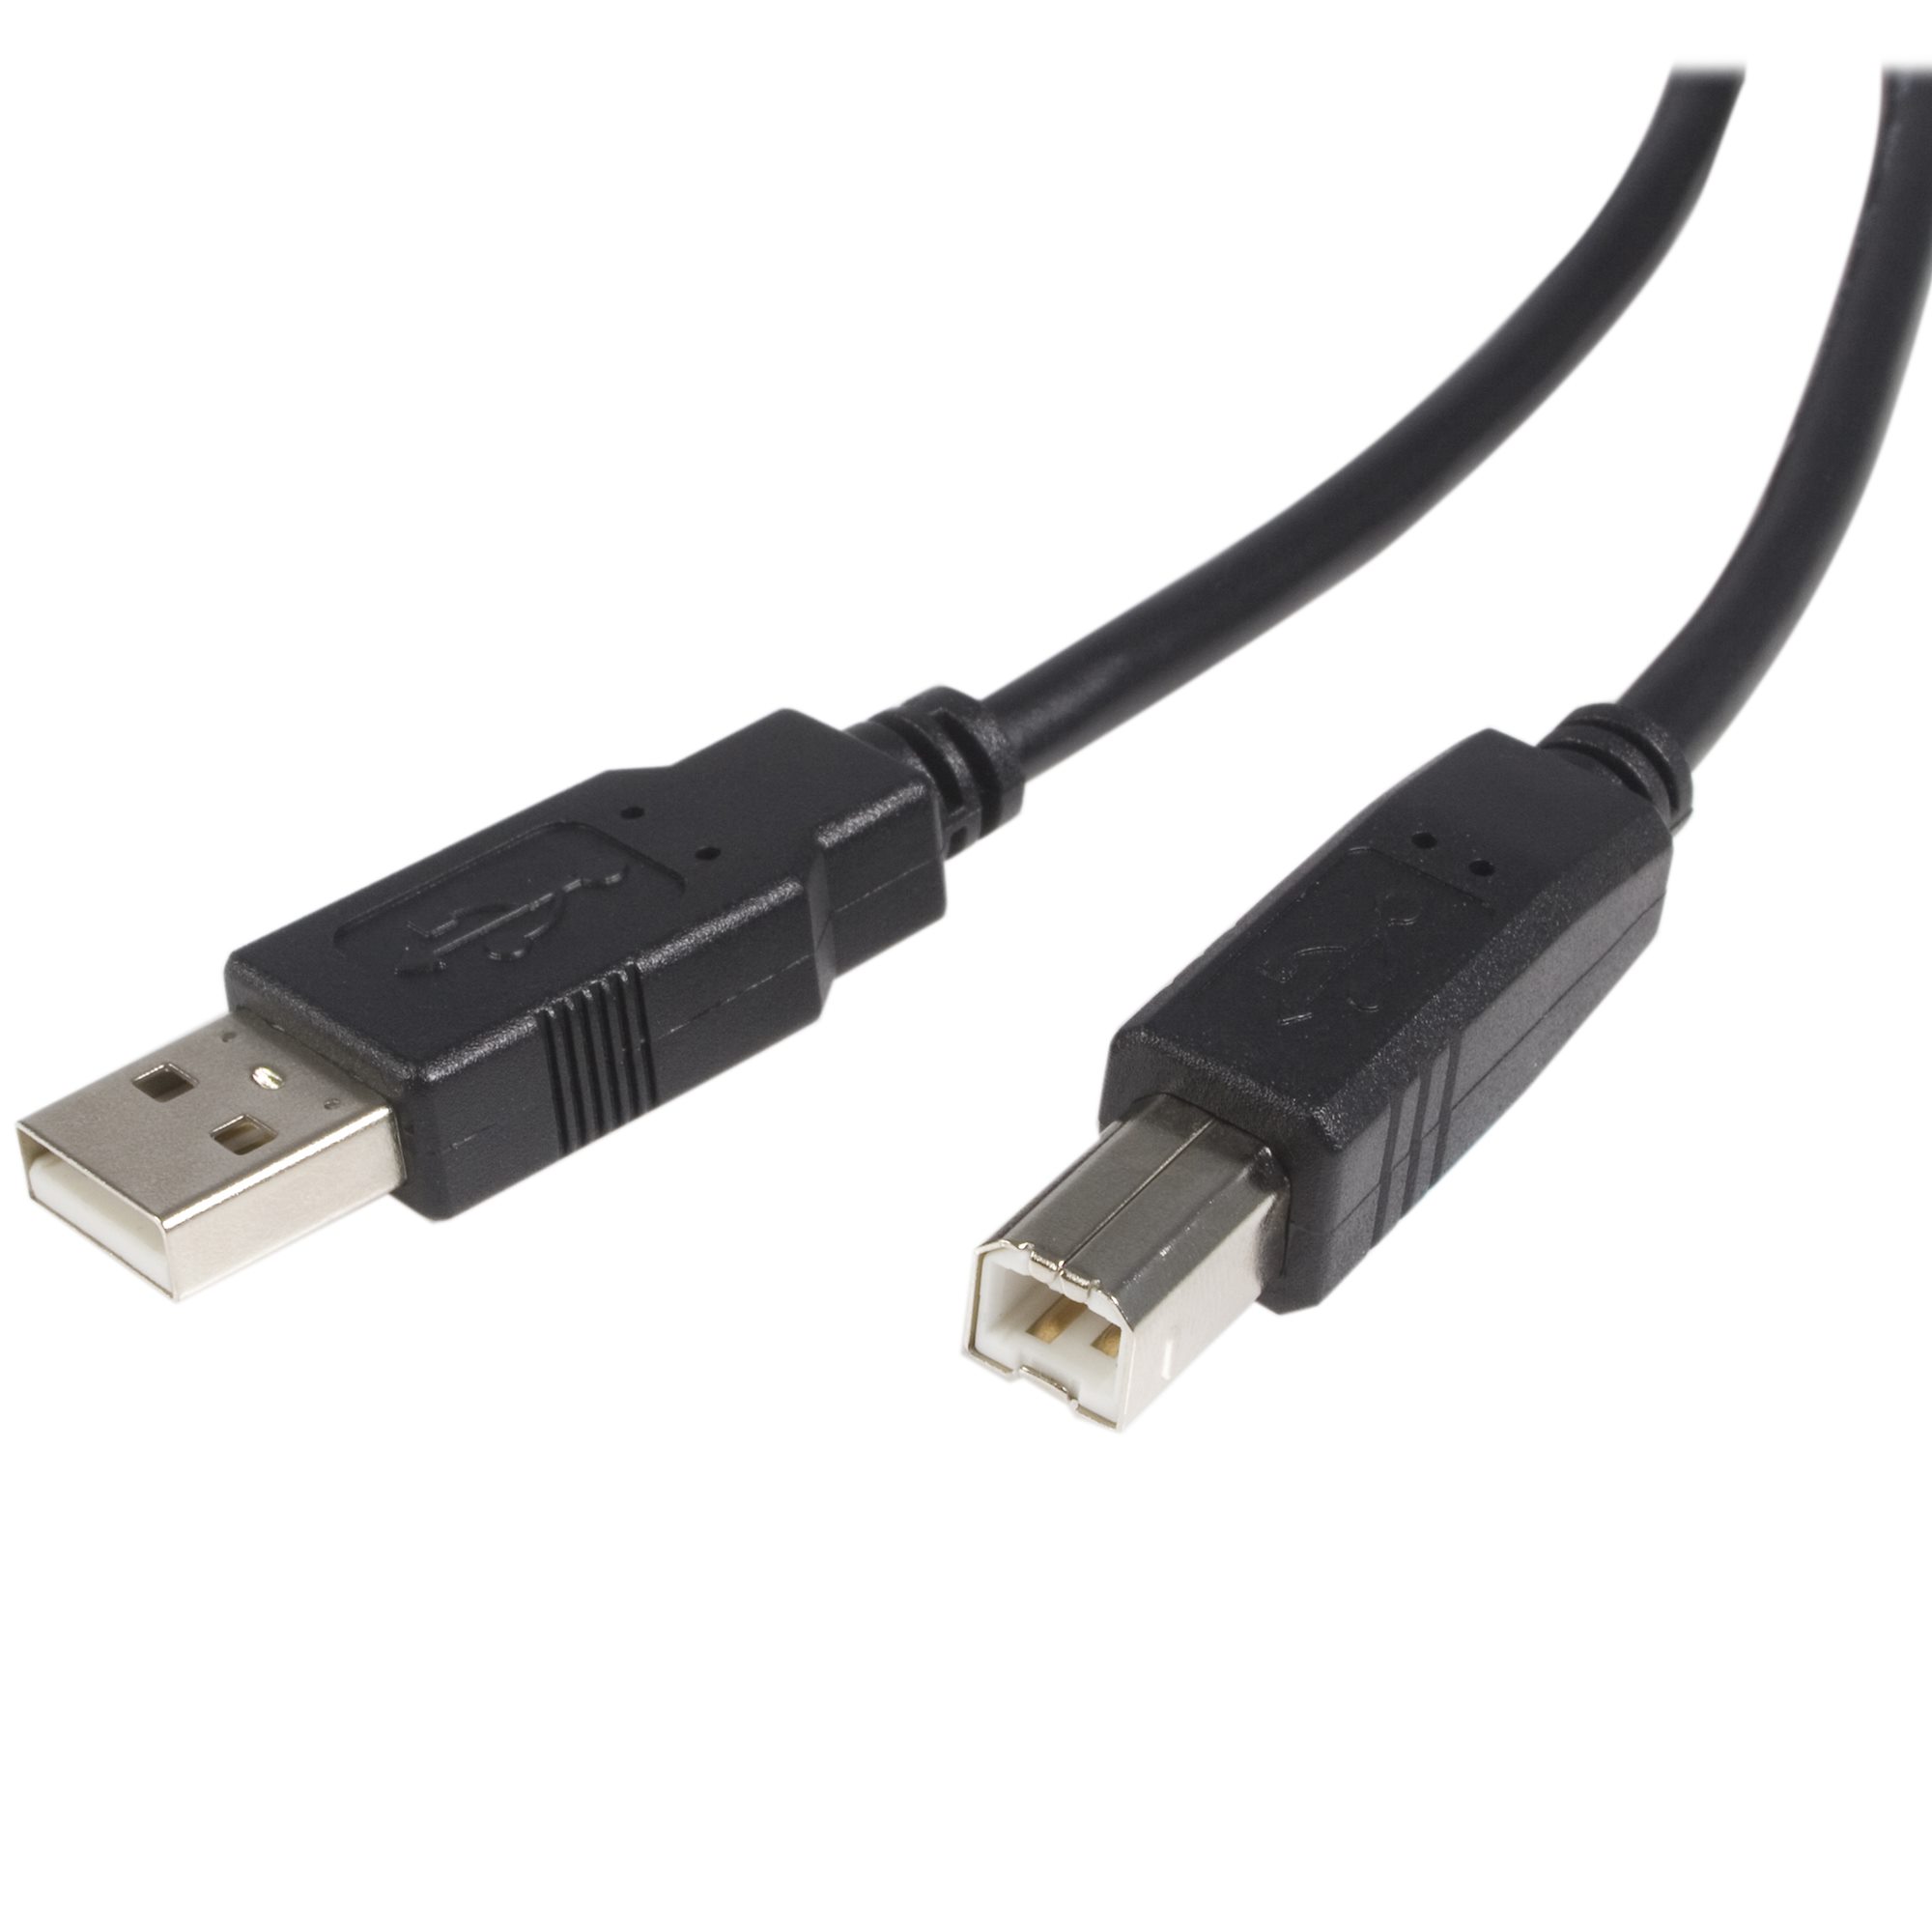 Braided 6ft 10ft 15ft USB 2.0 Type A Male to B Male AMBM Printer Cable Cord 